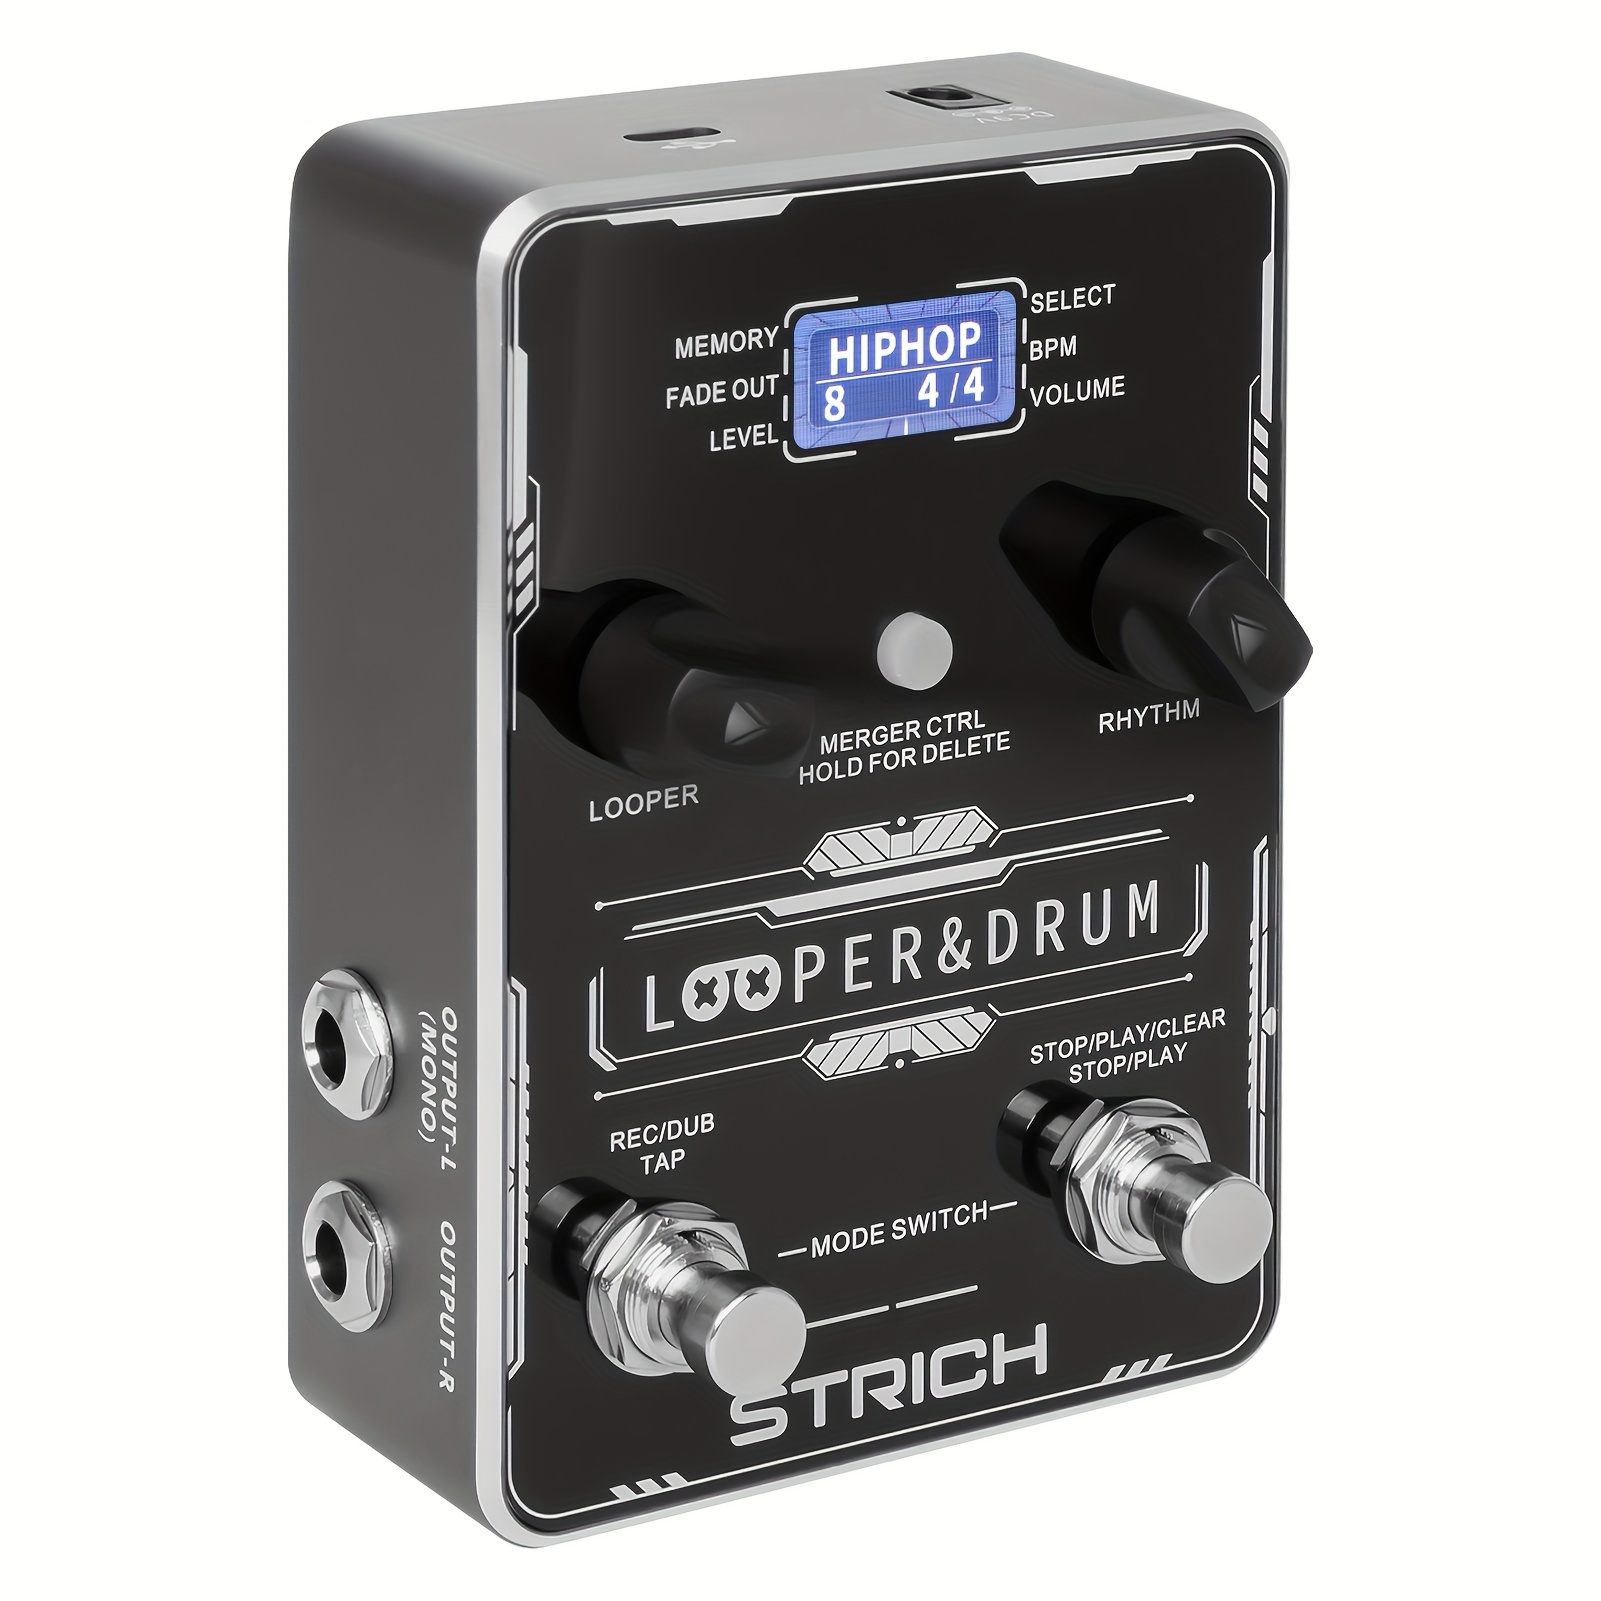 

Strich Stereo Looper Pedal Guitar Pedal With Built-in Drum Machine, 100 Diverse Drum Patterns, 160 Minutes Recording Time, Usb For Audio Import/export, Support Software Editing Footswitch Control